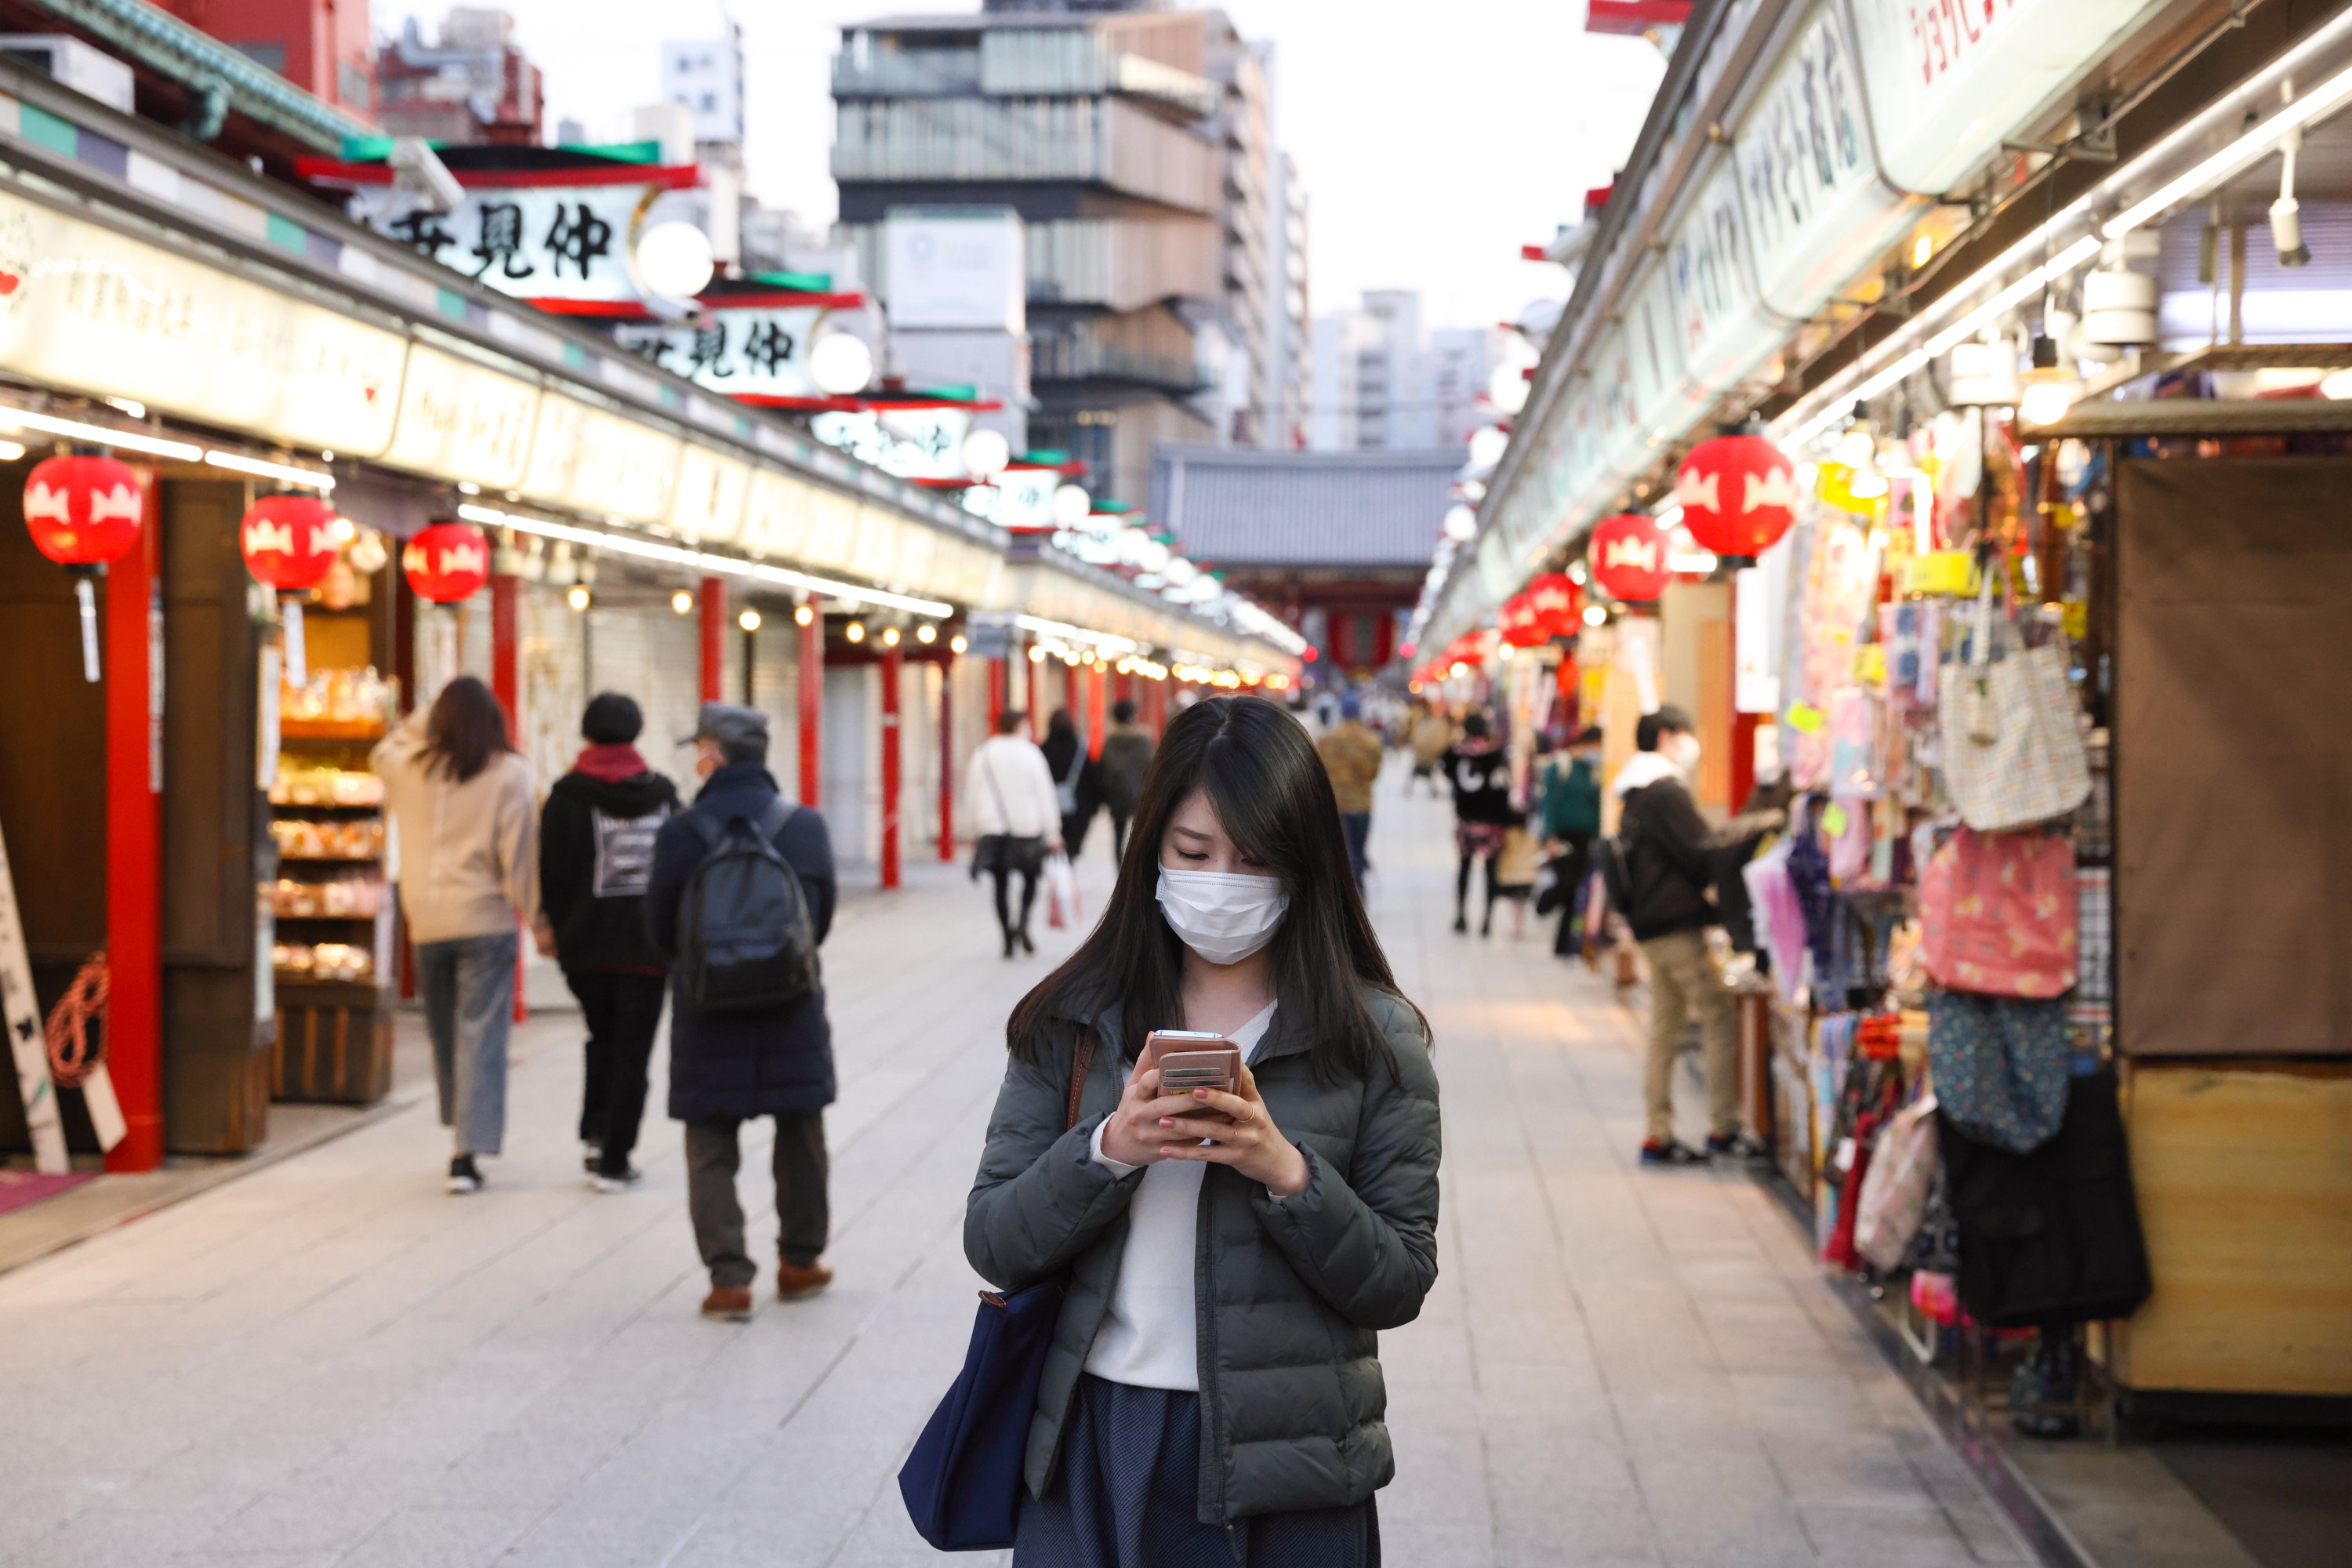 What dating app is popular in japan?